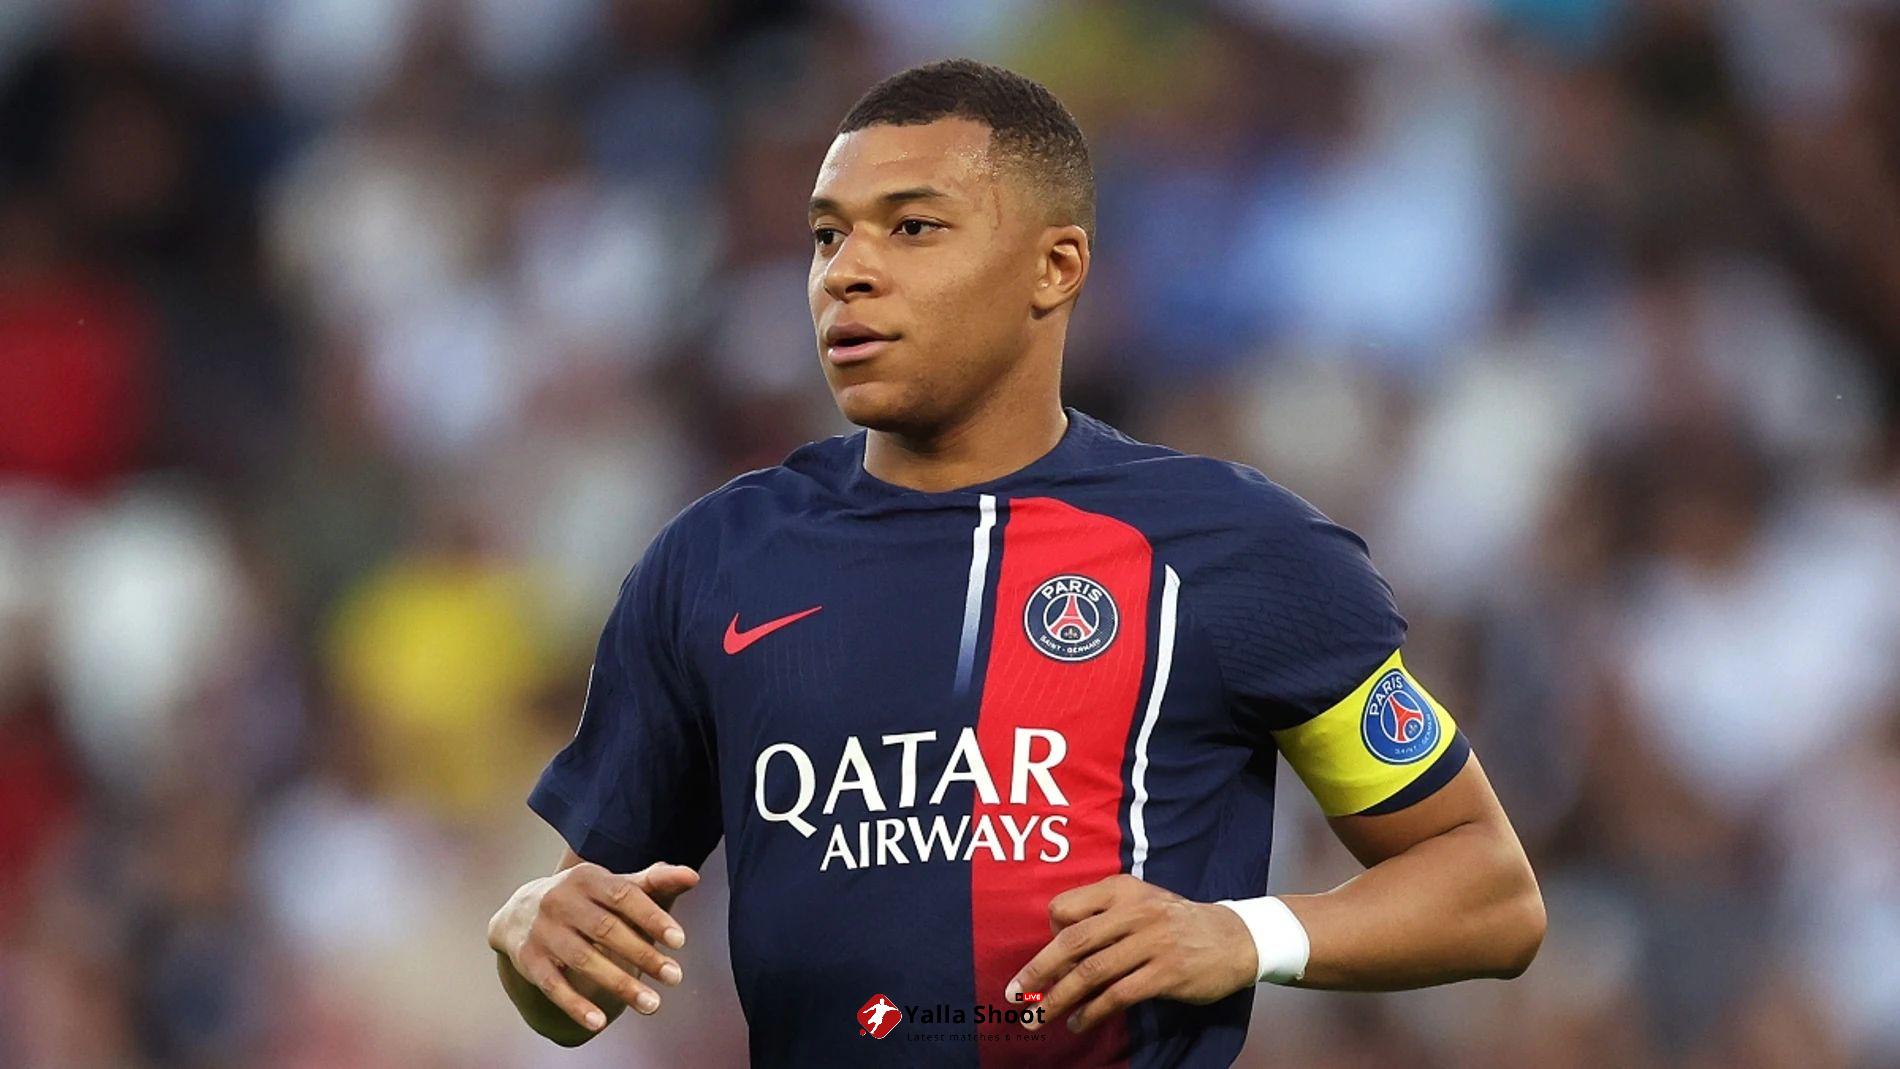 Reports in France claim that Kylian Mbappe has chosen to join Real Madrid